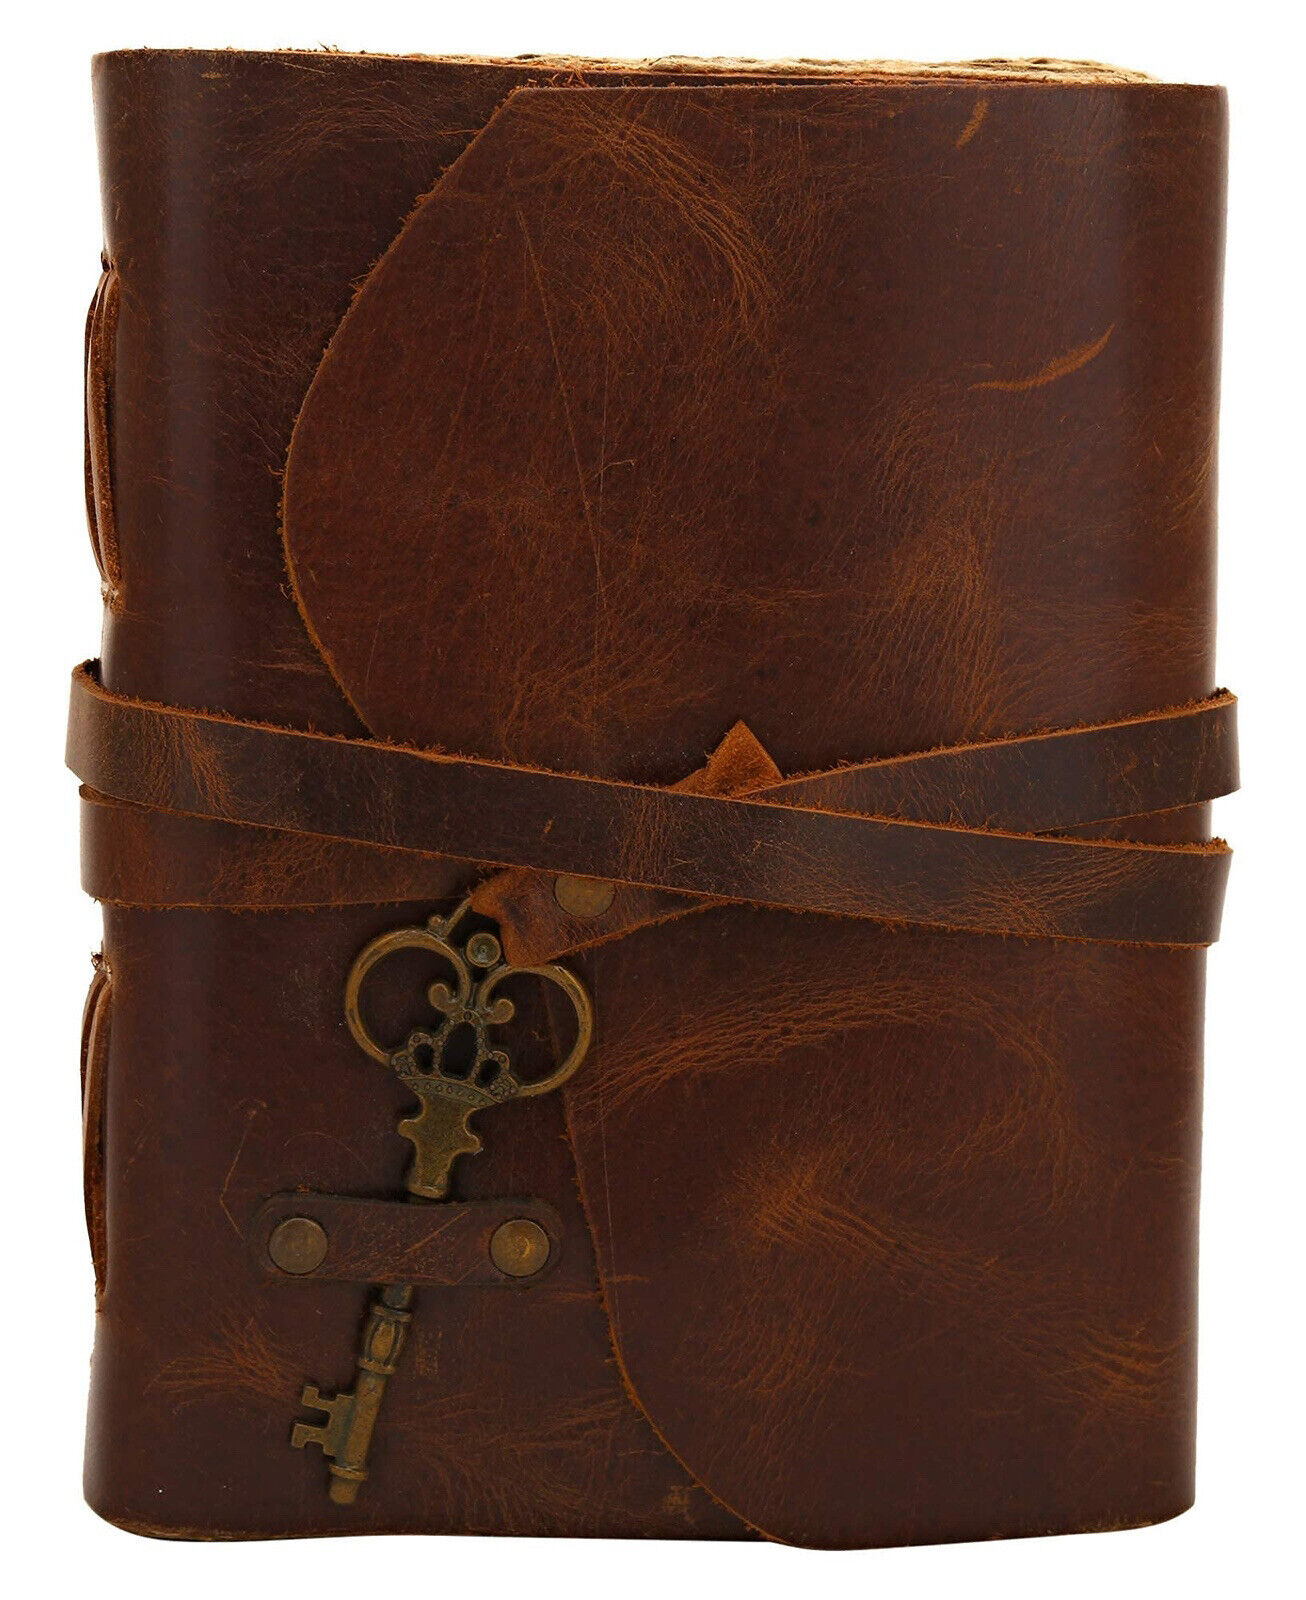 leather journal with key Antique leather journal vintage leather journal Deckle 